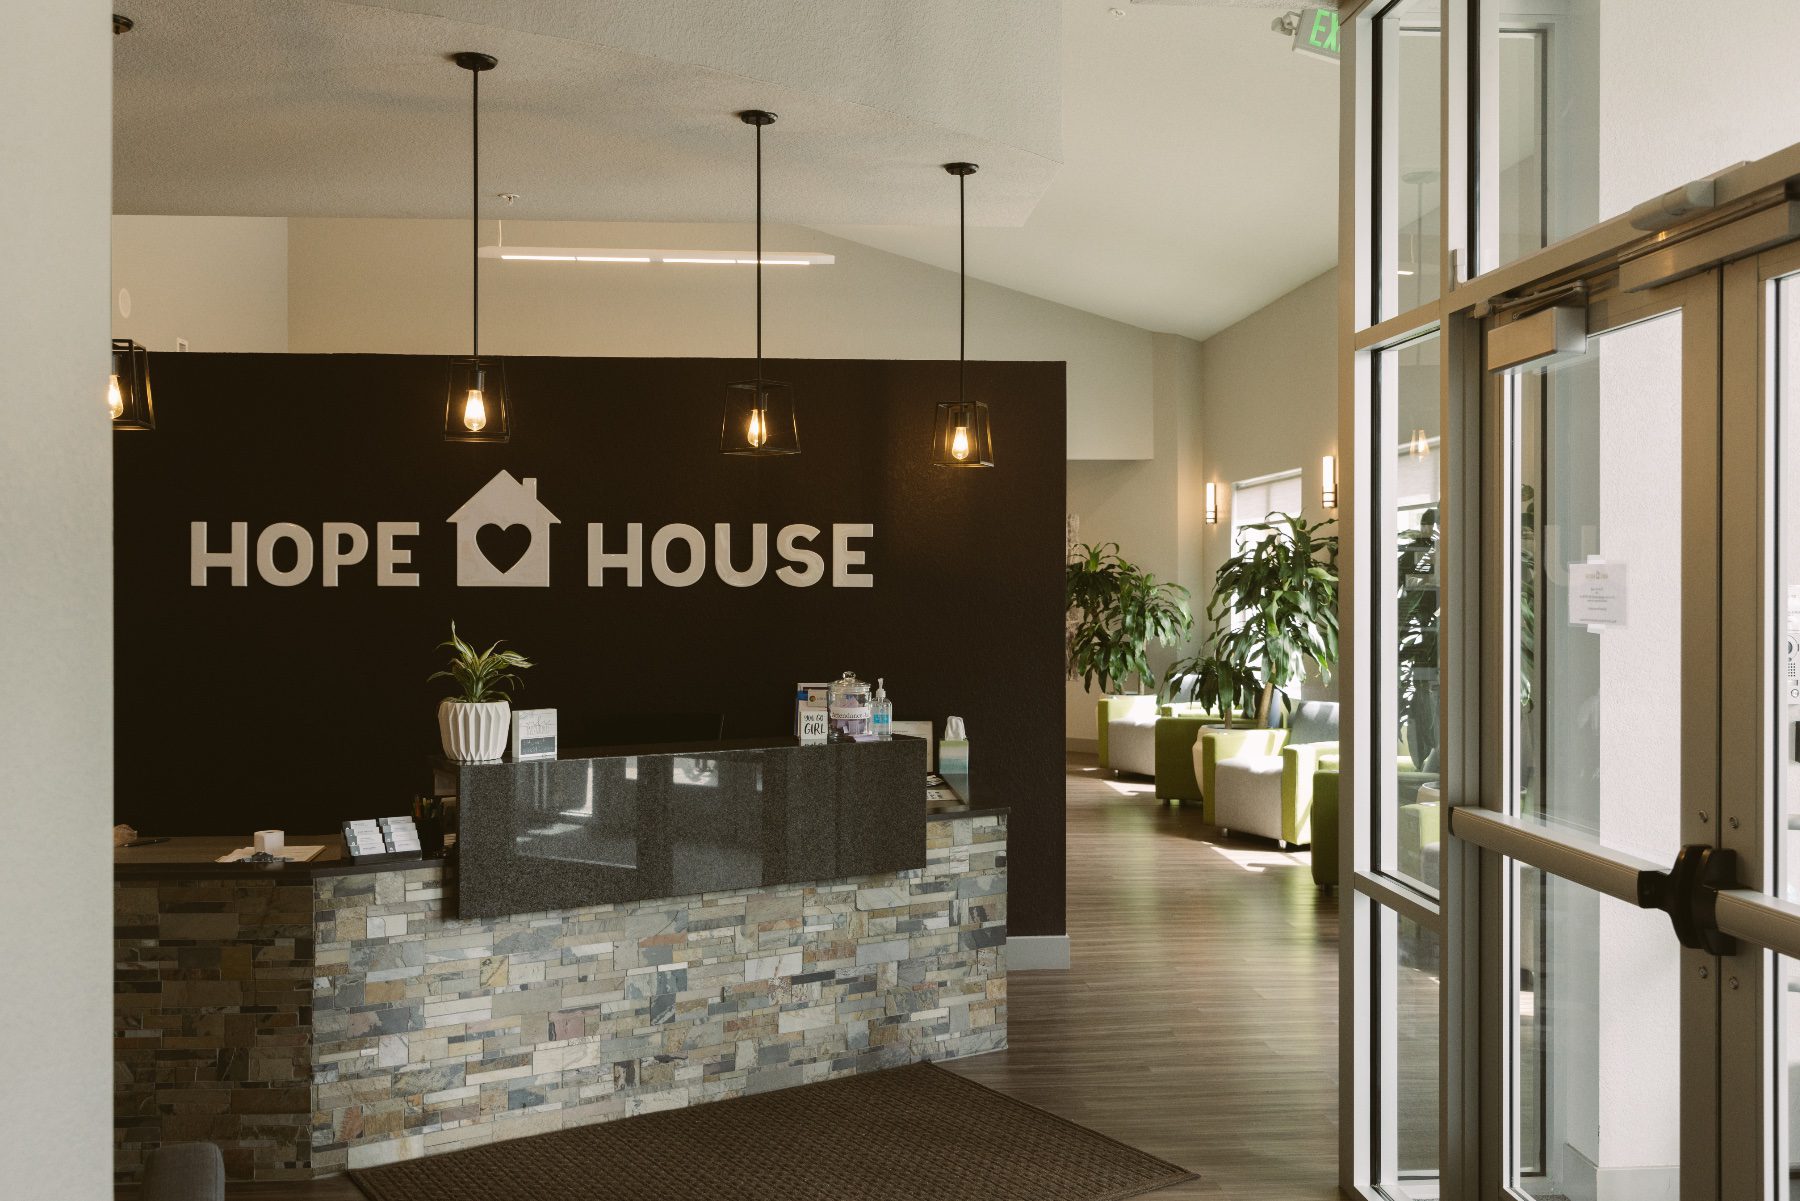 A building lobby with the words "Hope House" on a wall behind a desk.